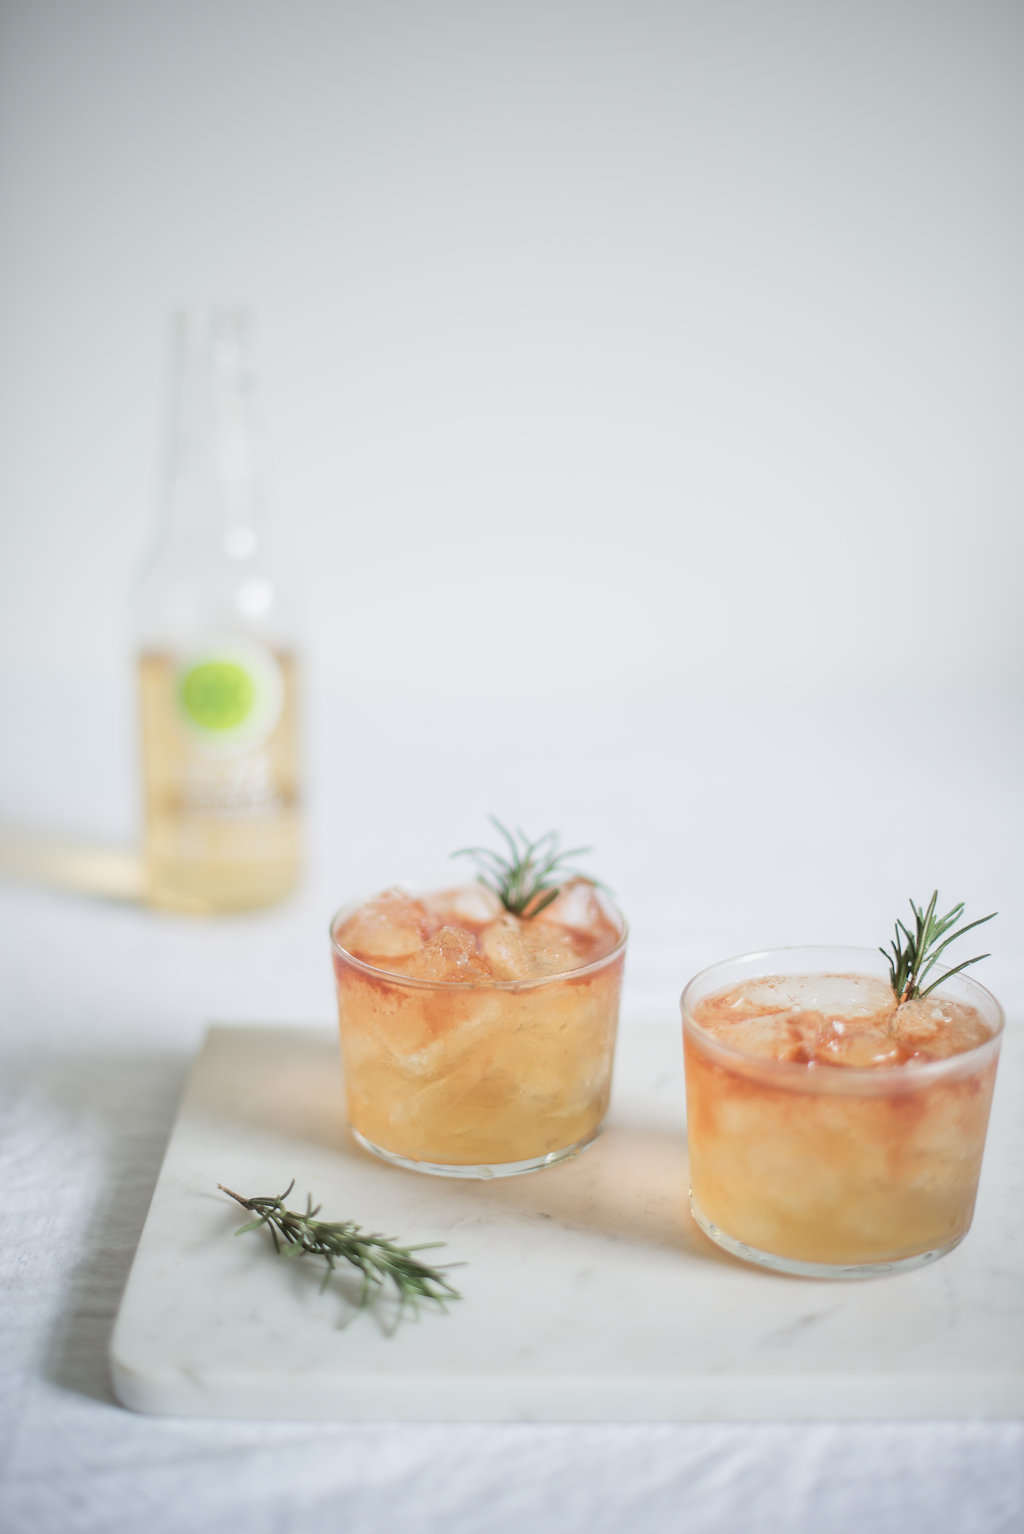 sparkling apple + whiskey holiday cocktail via Anne Sage